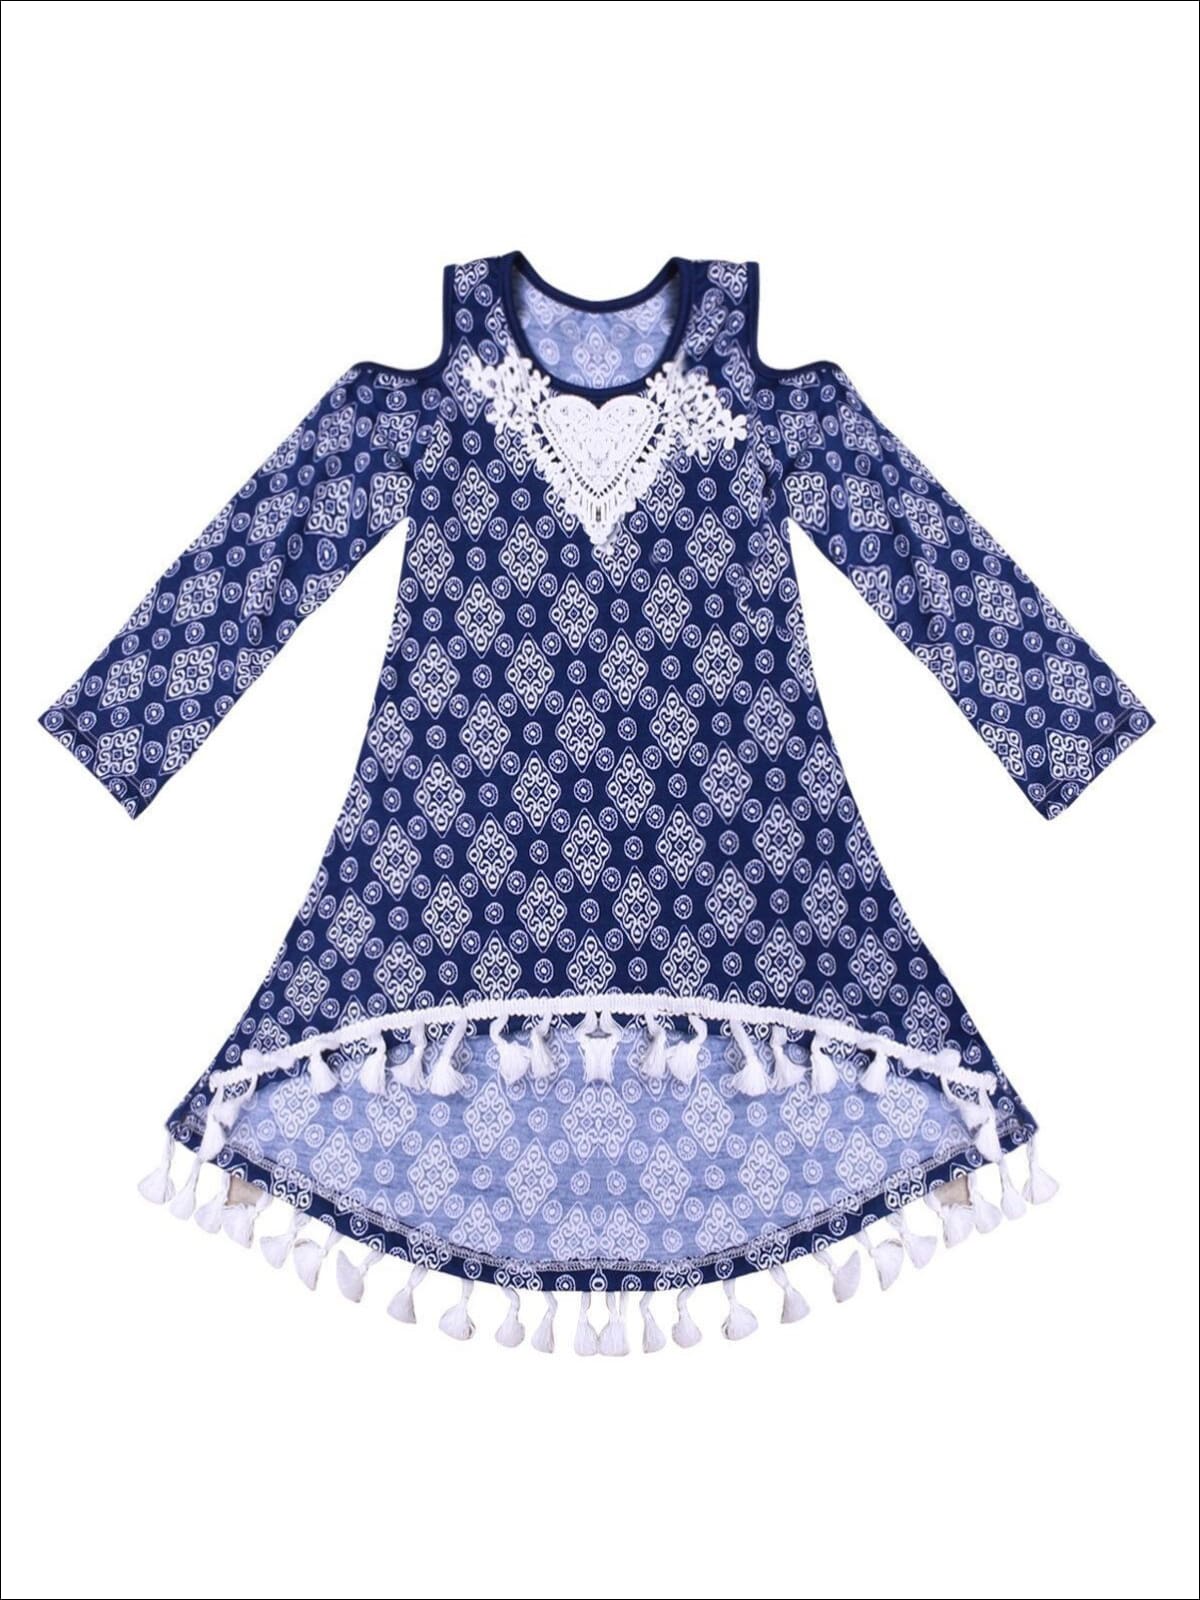 Little girls long-sleeve cold-shoulder medallion print tunic with embroidered lace heart at the collar,  heart elbow patches. and tassel hemline - Mia Belle Girls